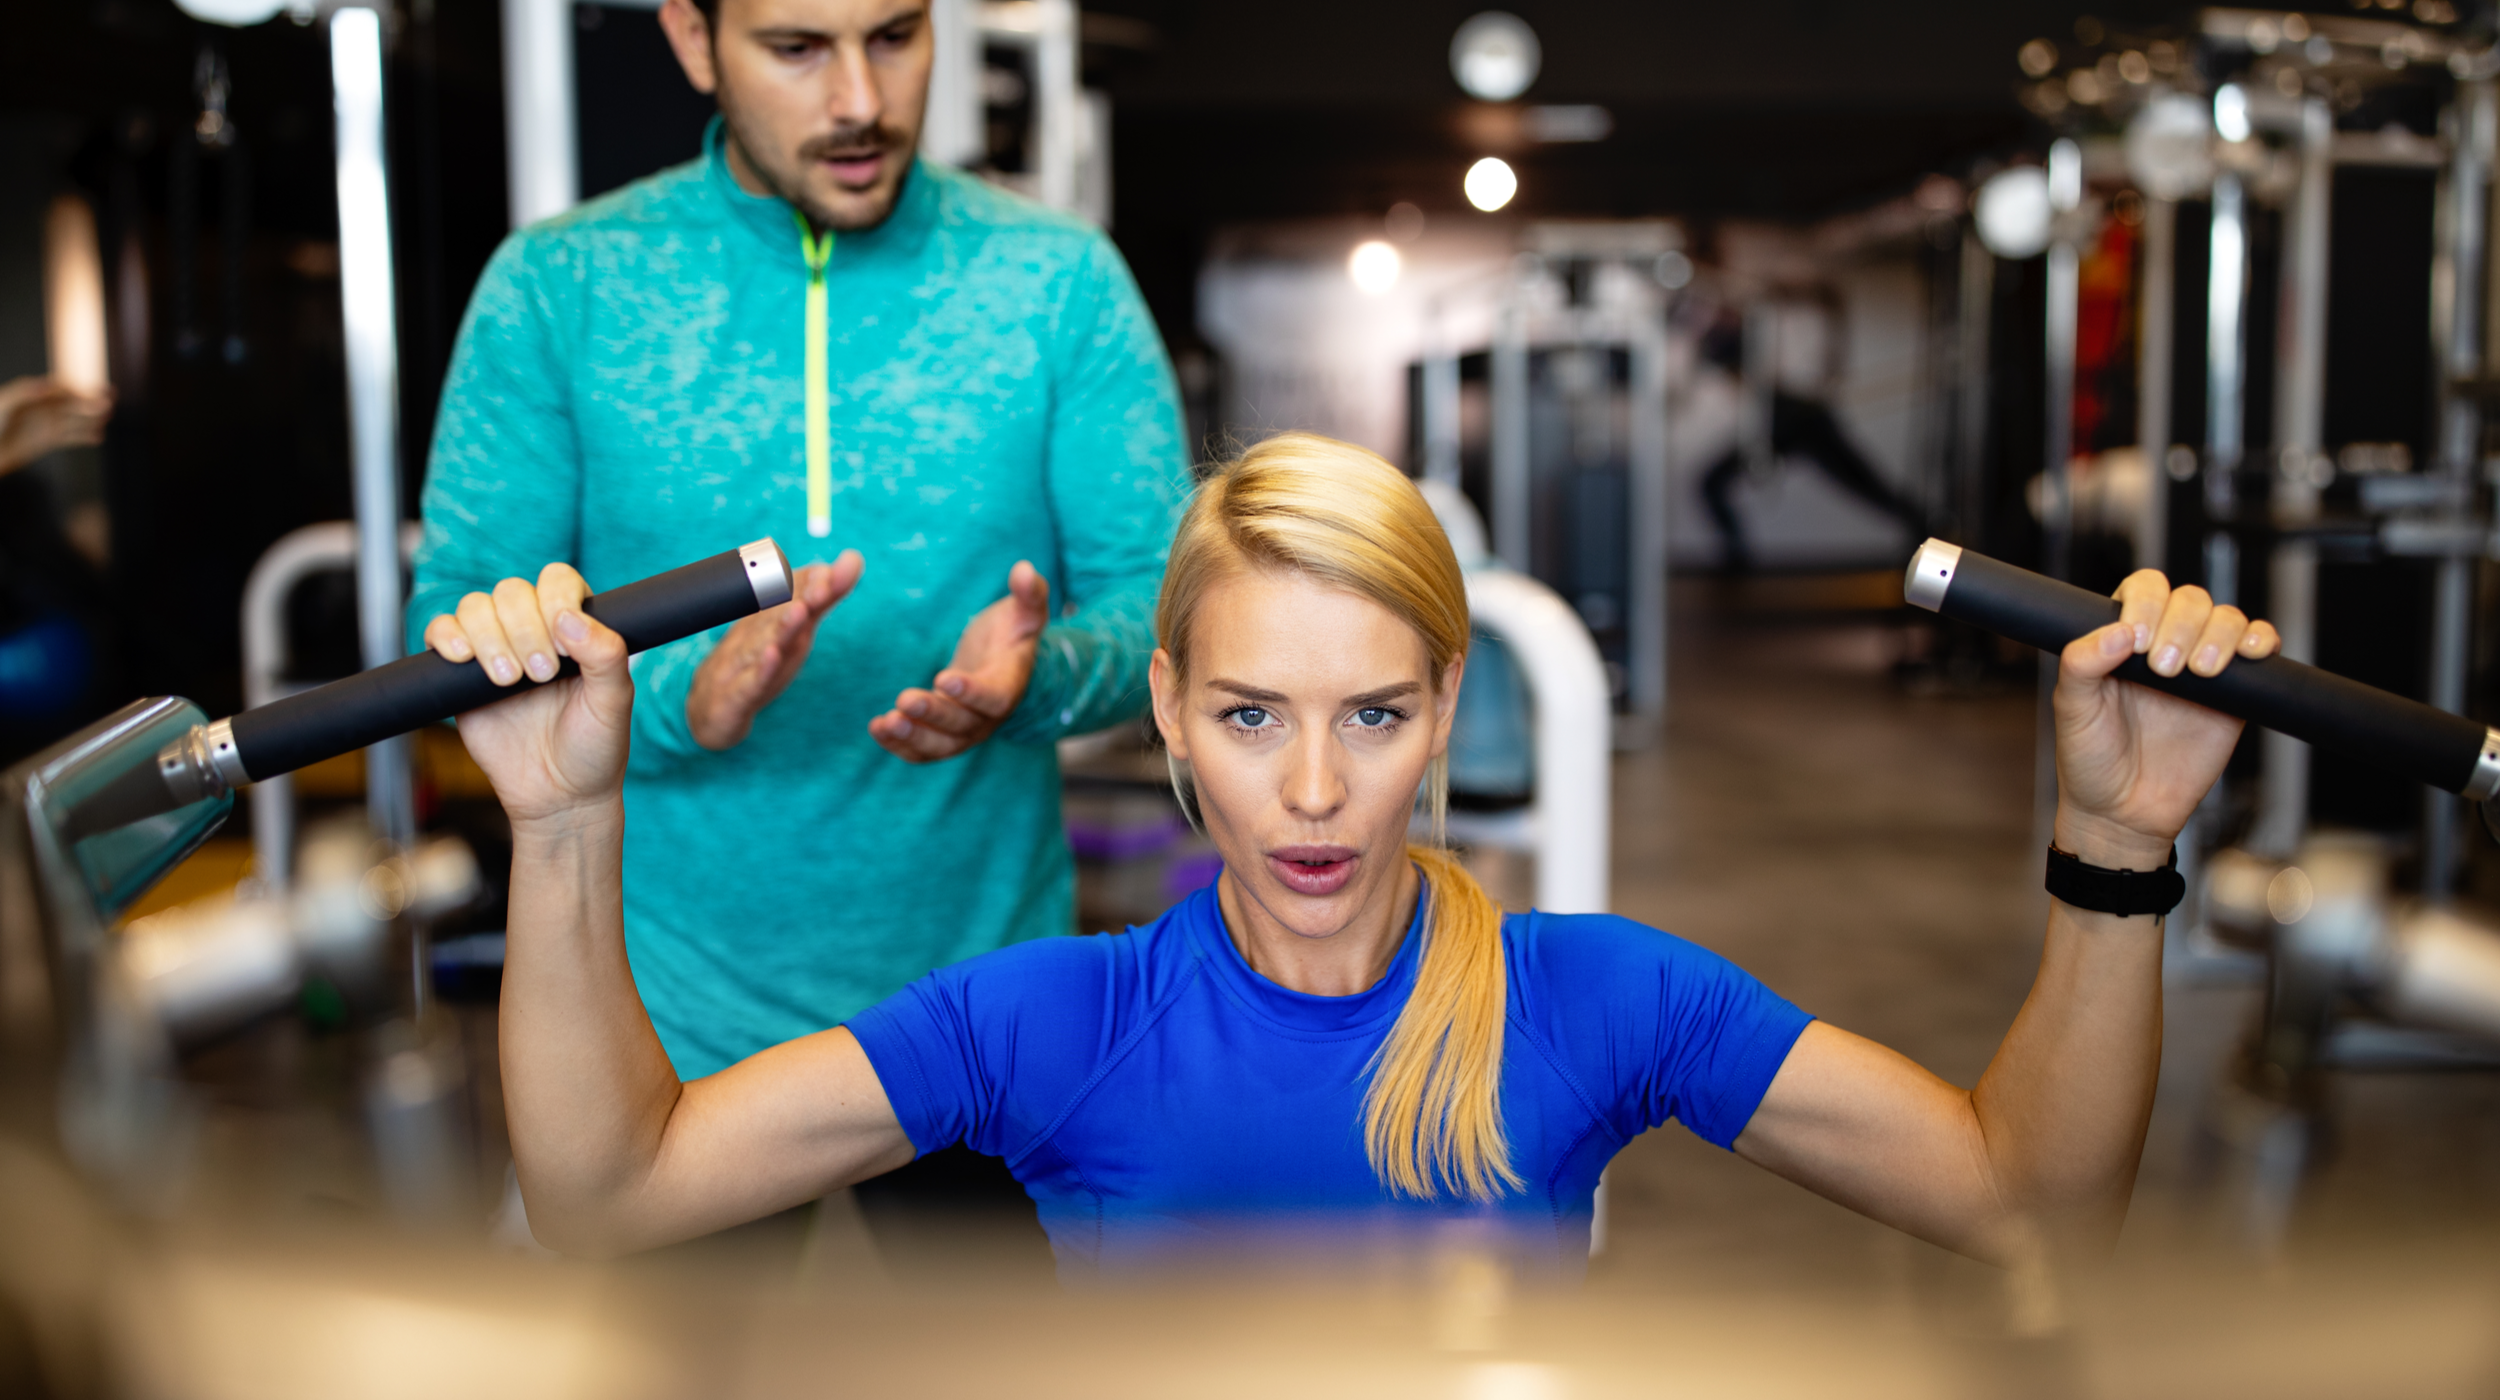 What Should Personal Trainers do When Clients Don’t See Results?